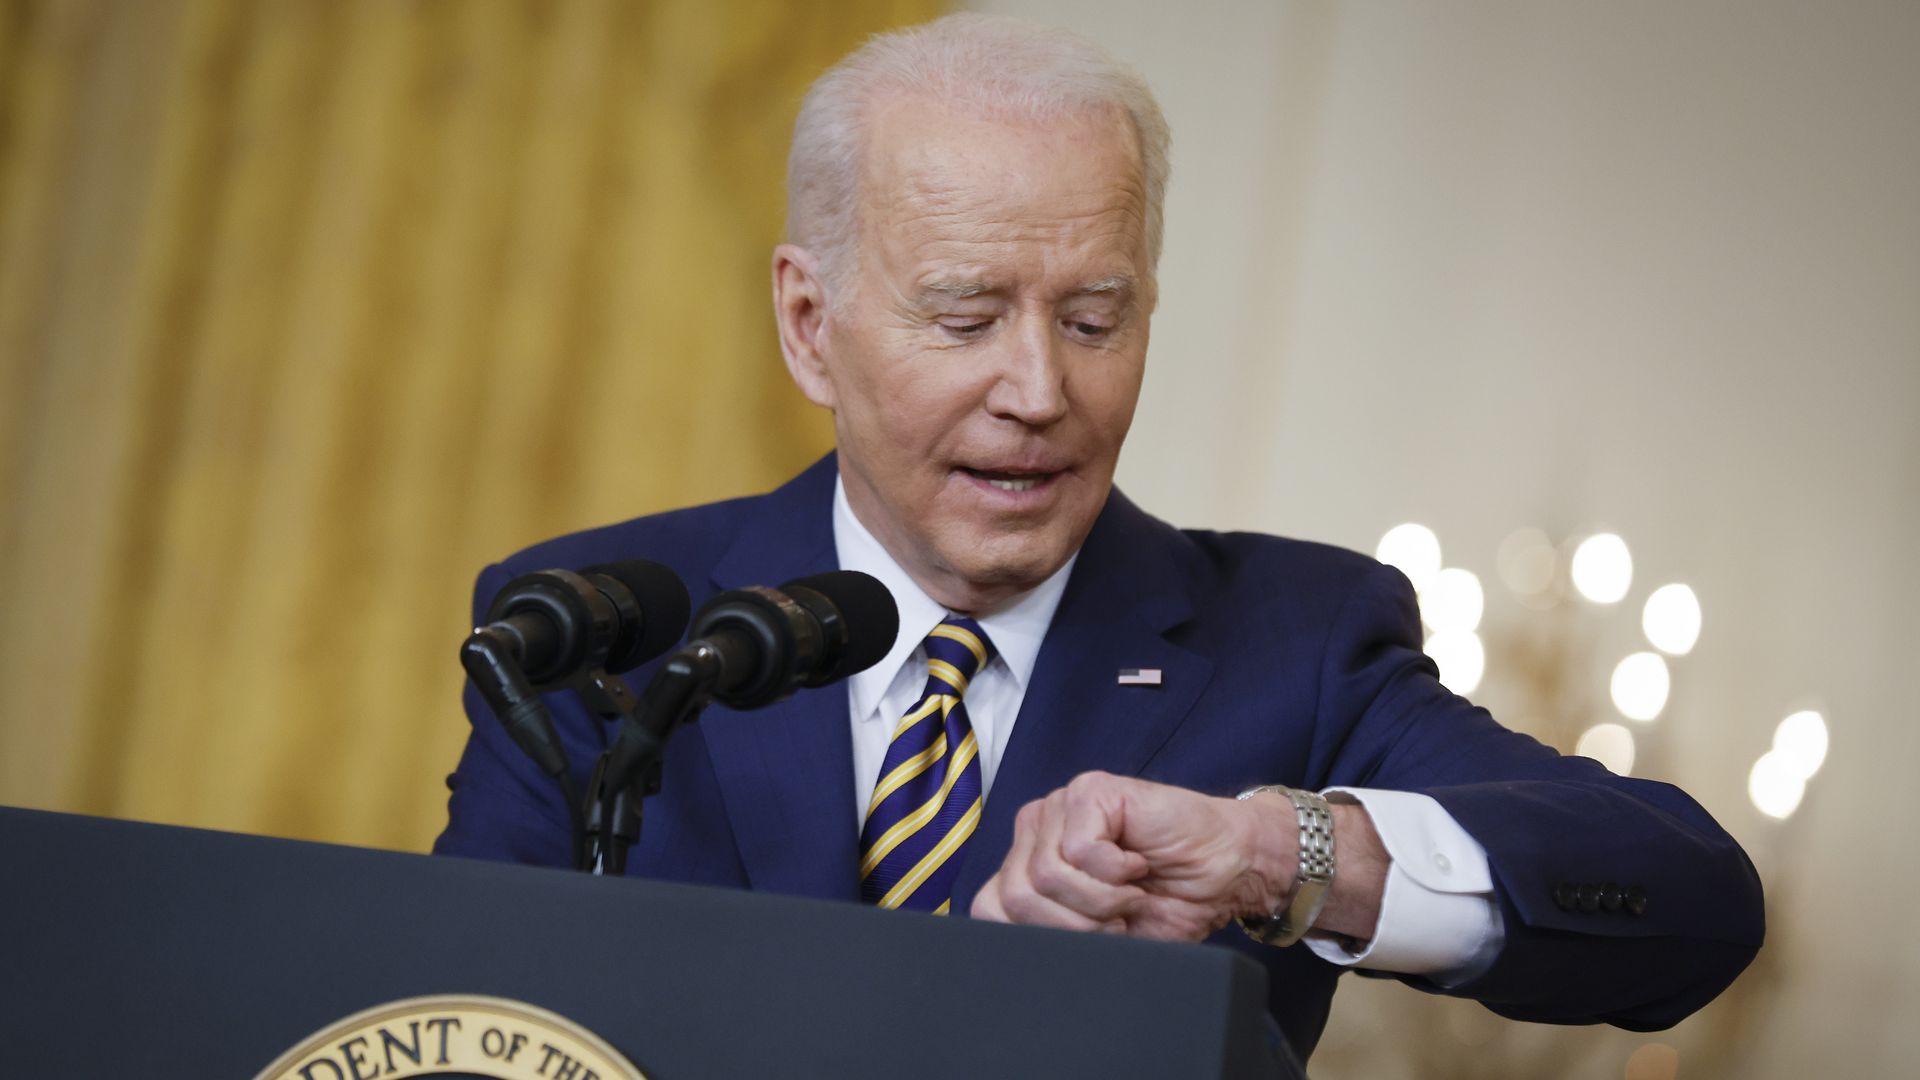 President Biden is seen checking his watch as his news conference went into overtime on Wednesday.